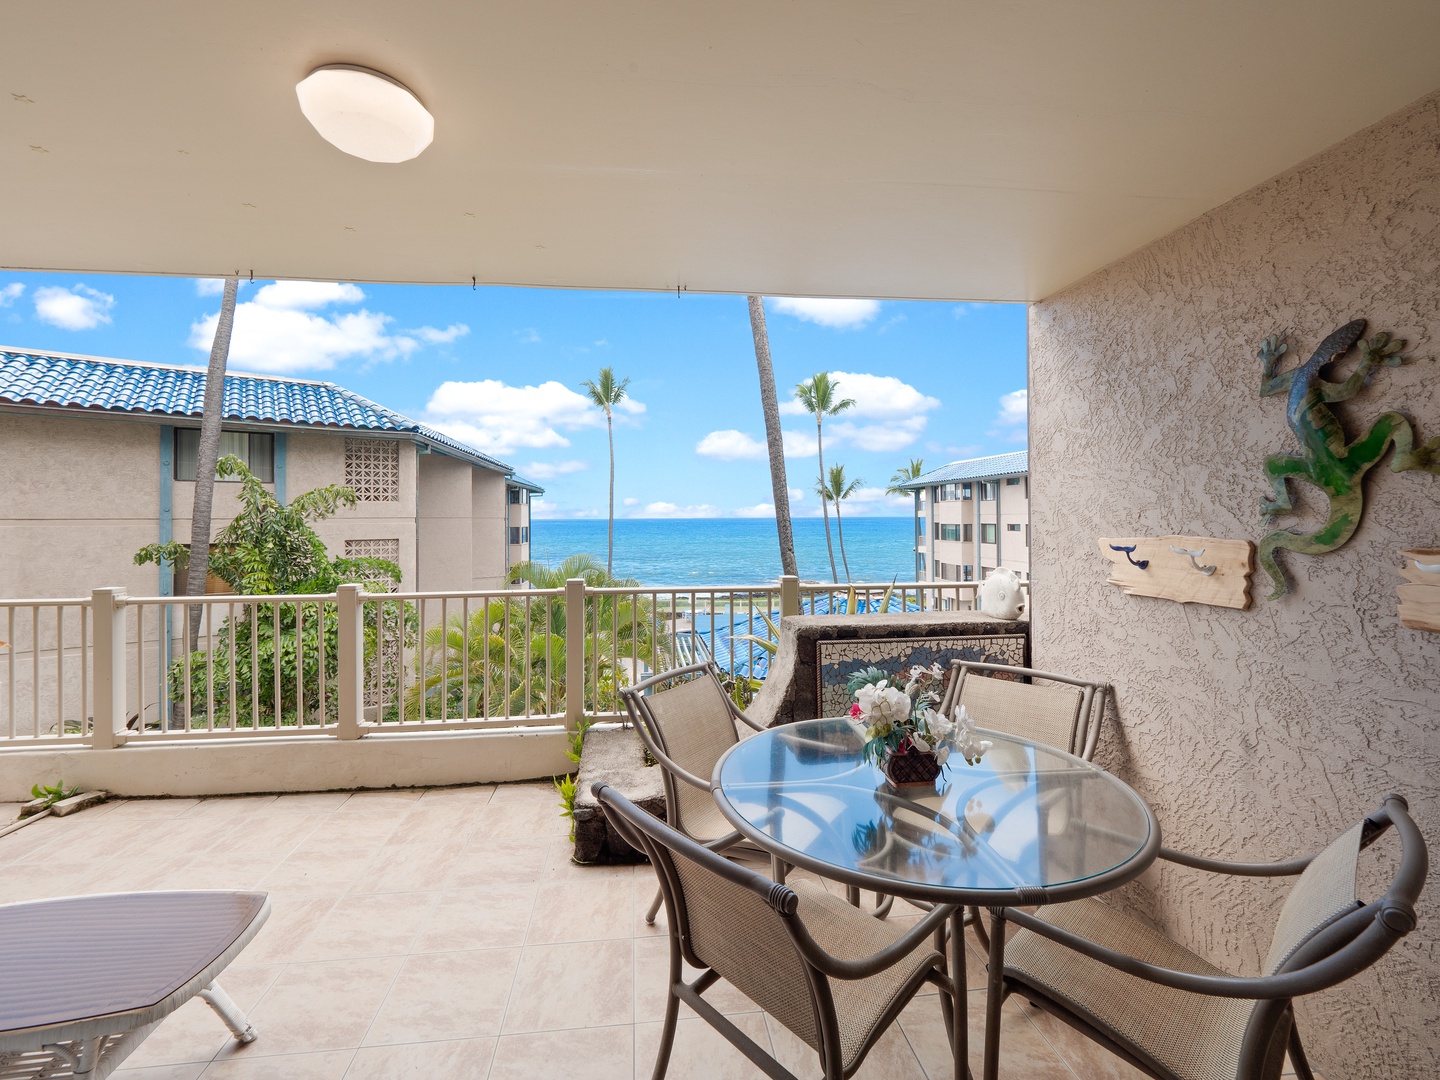 Relish the fresh air on the private lanai with an ocean view